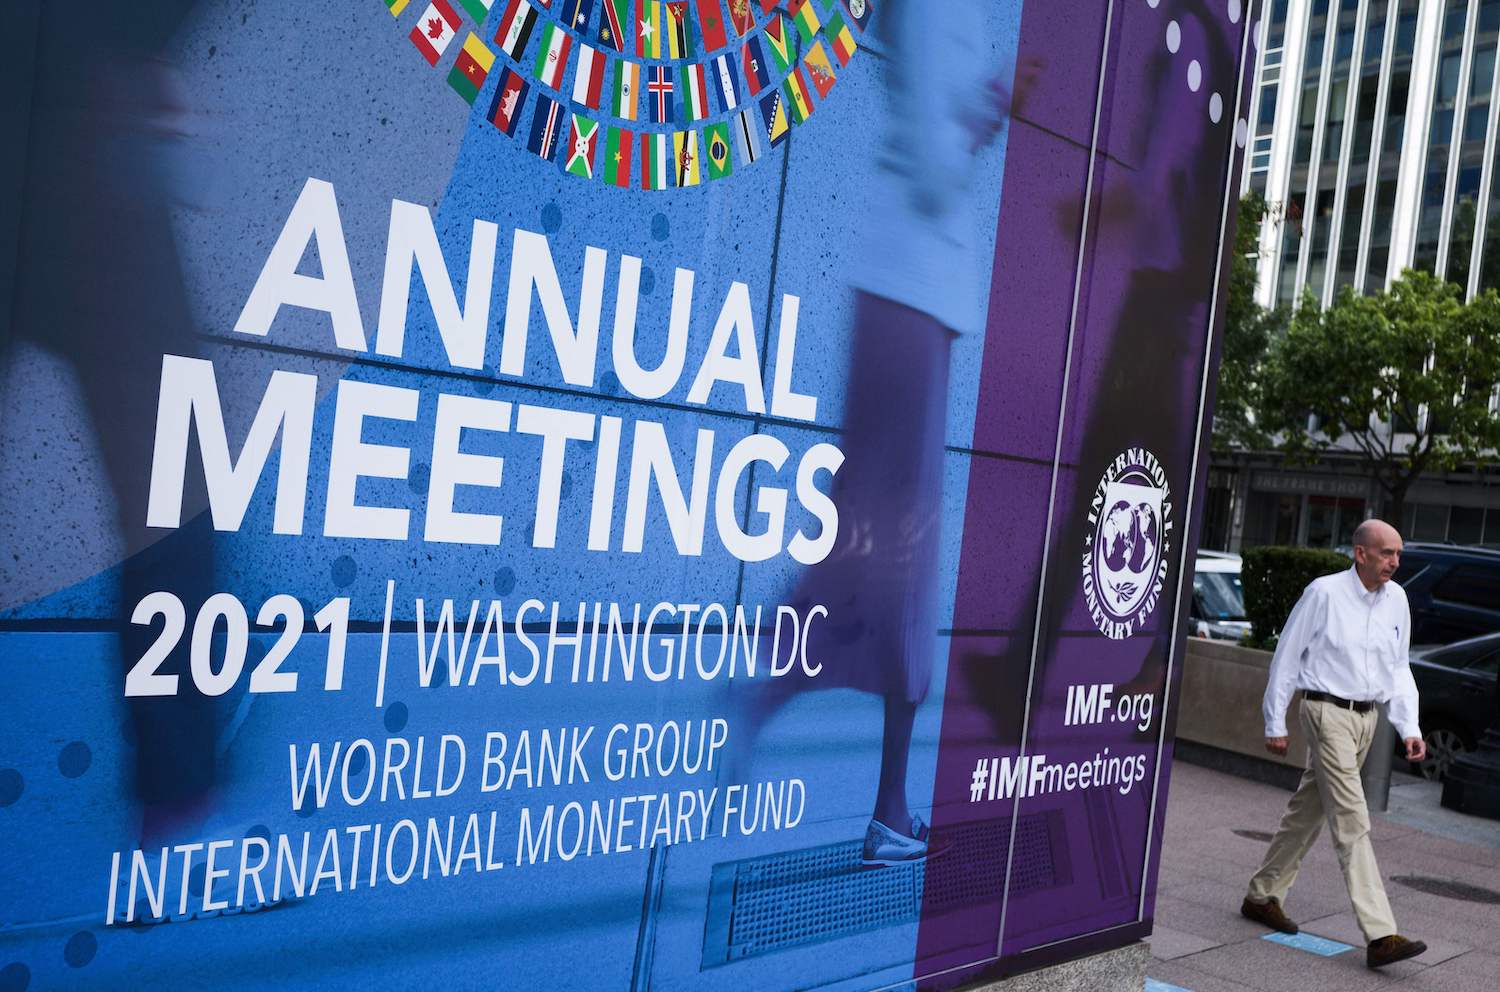 A path away from people’s development: The IMF-WBG agenda of corporate revitalisation